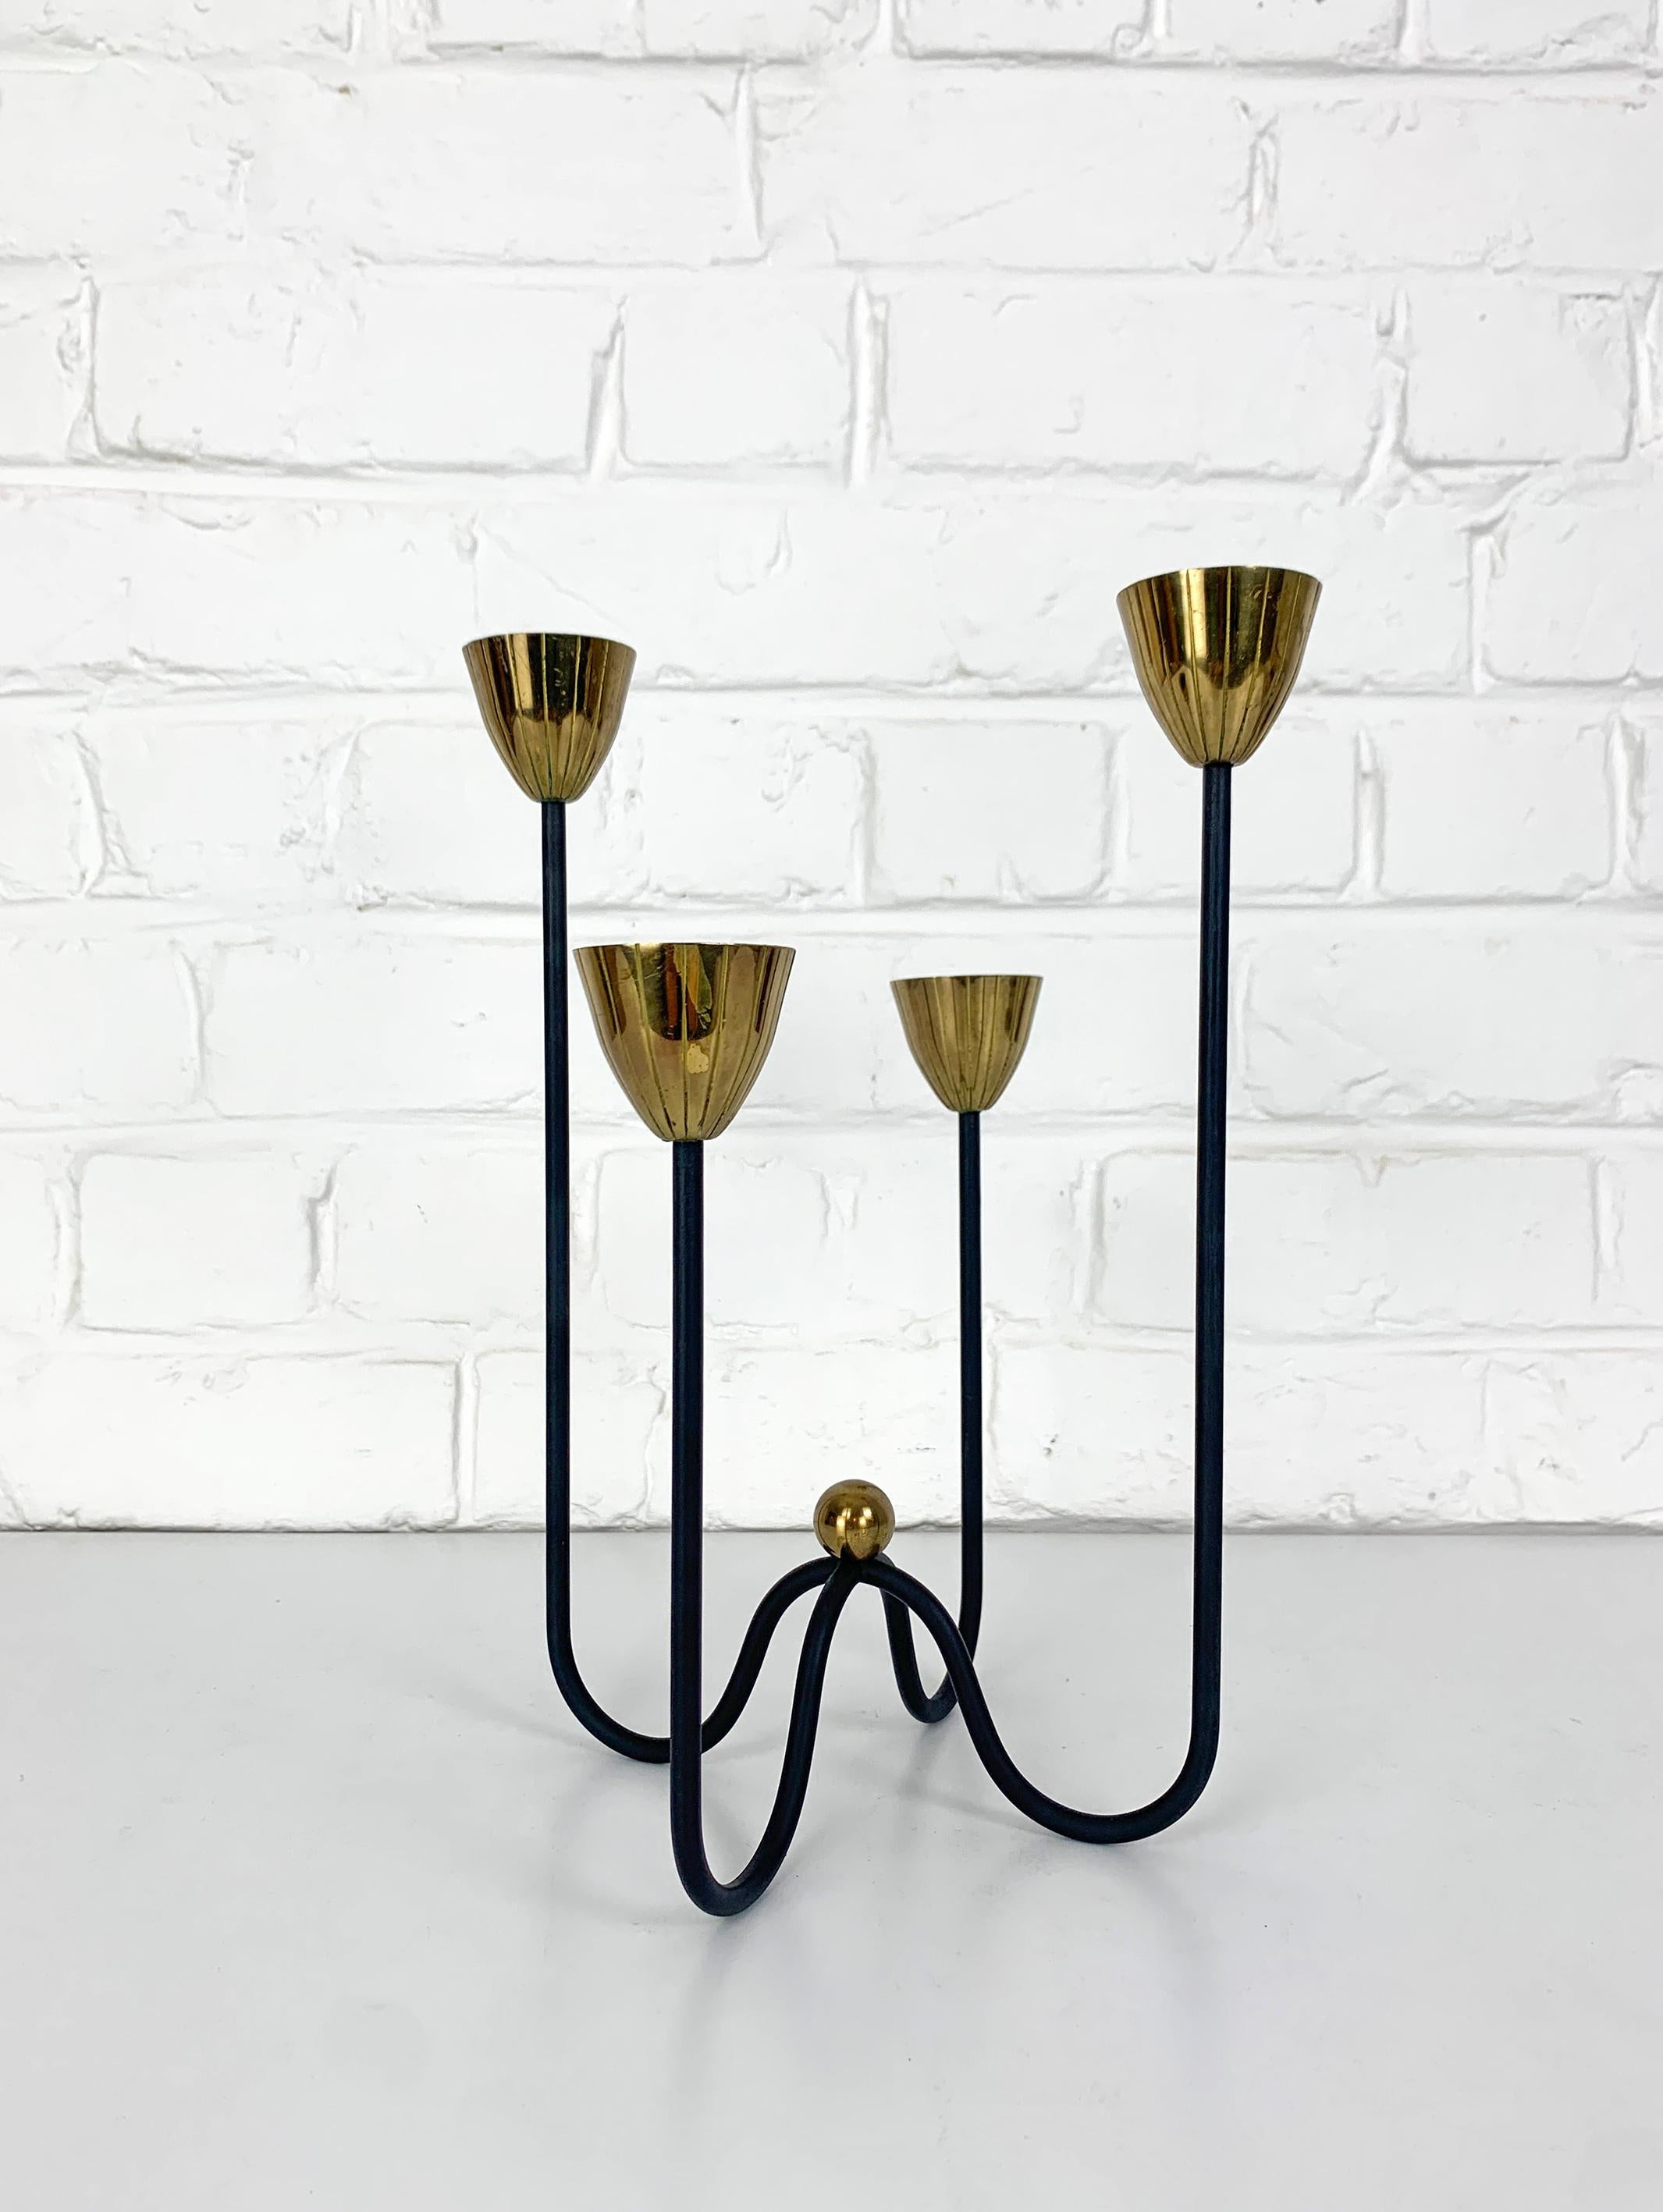 Swedish Modernist candle holder by Gunnar Ander. Produced by Ystad-Metall, located in the town of Ystad in Sweden. 

Stylised flowers in brass on 4 asymmetrical black enameled steel arms. 

Gunnar Ander is a Swedish artist born in 1908. He created